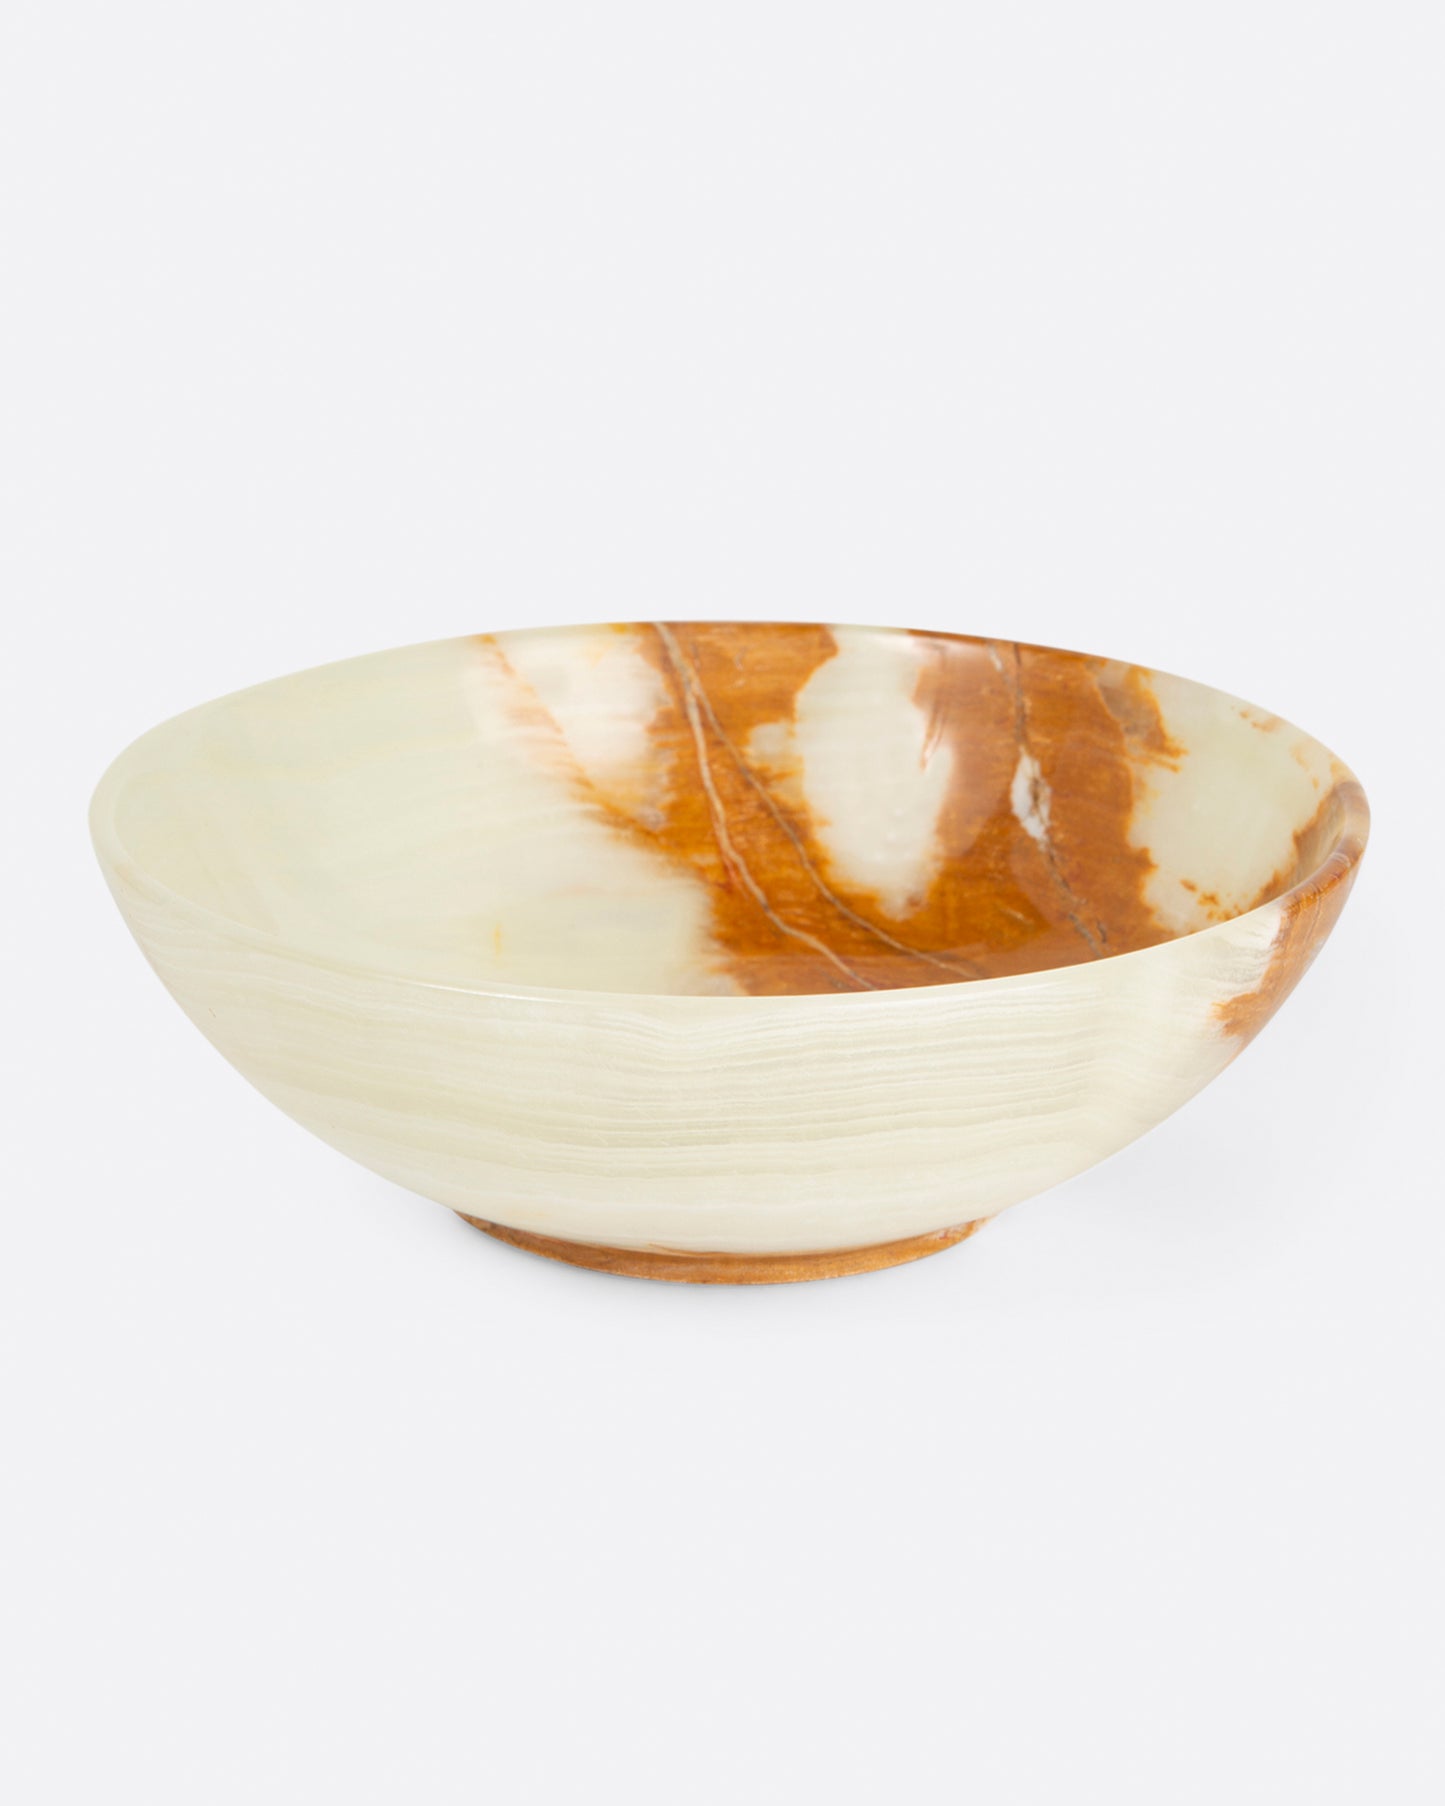 A single medium green onyx bowl, shown from the side.